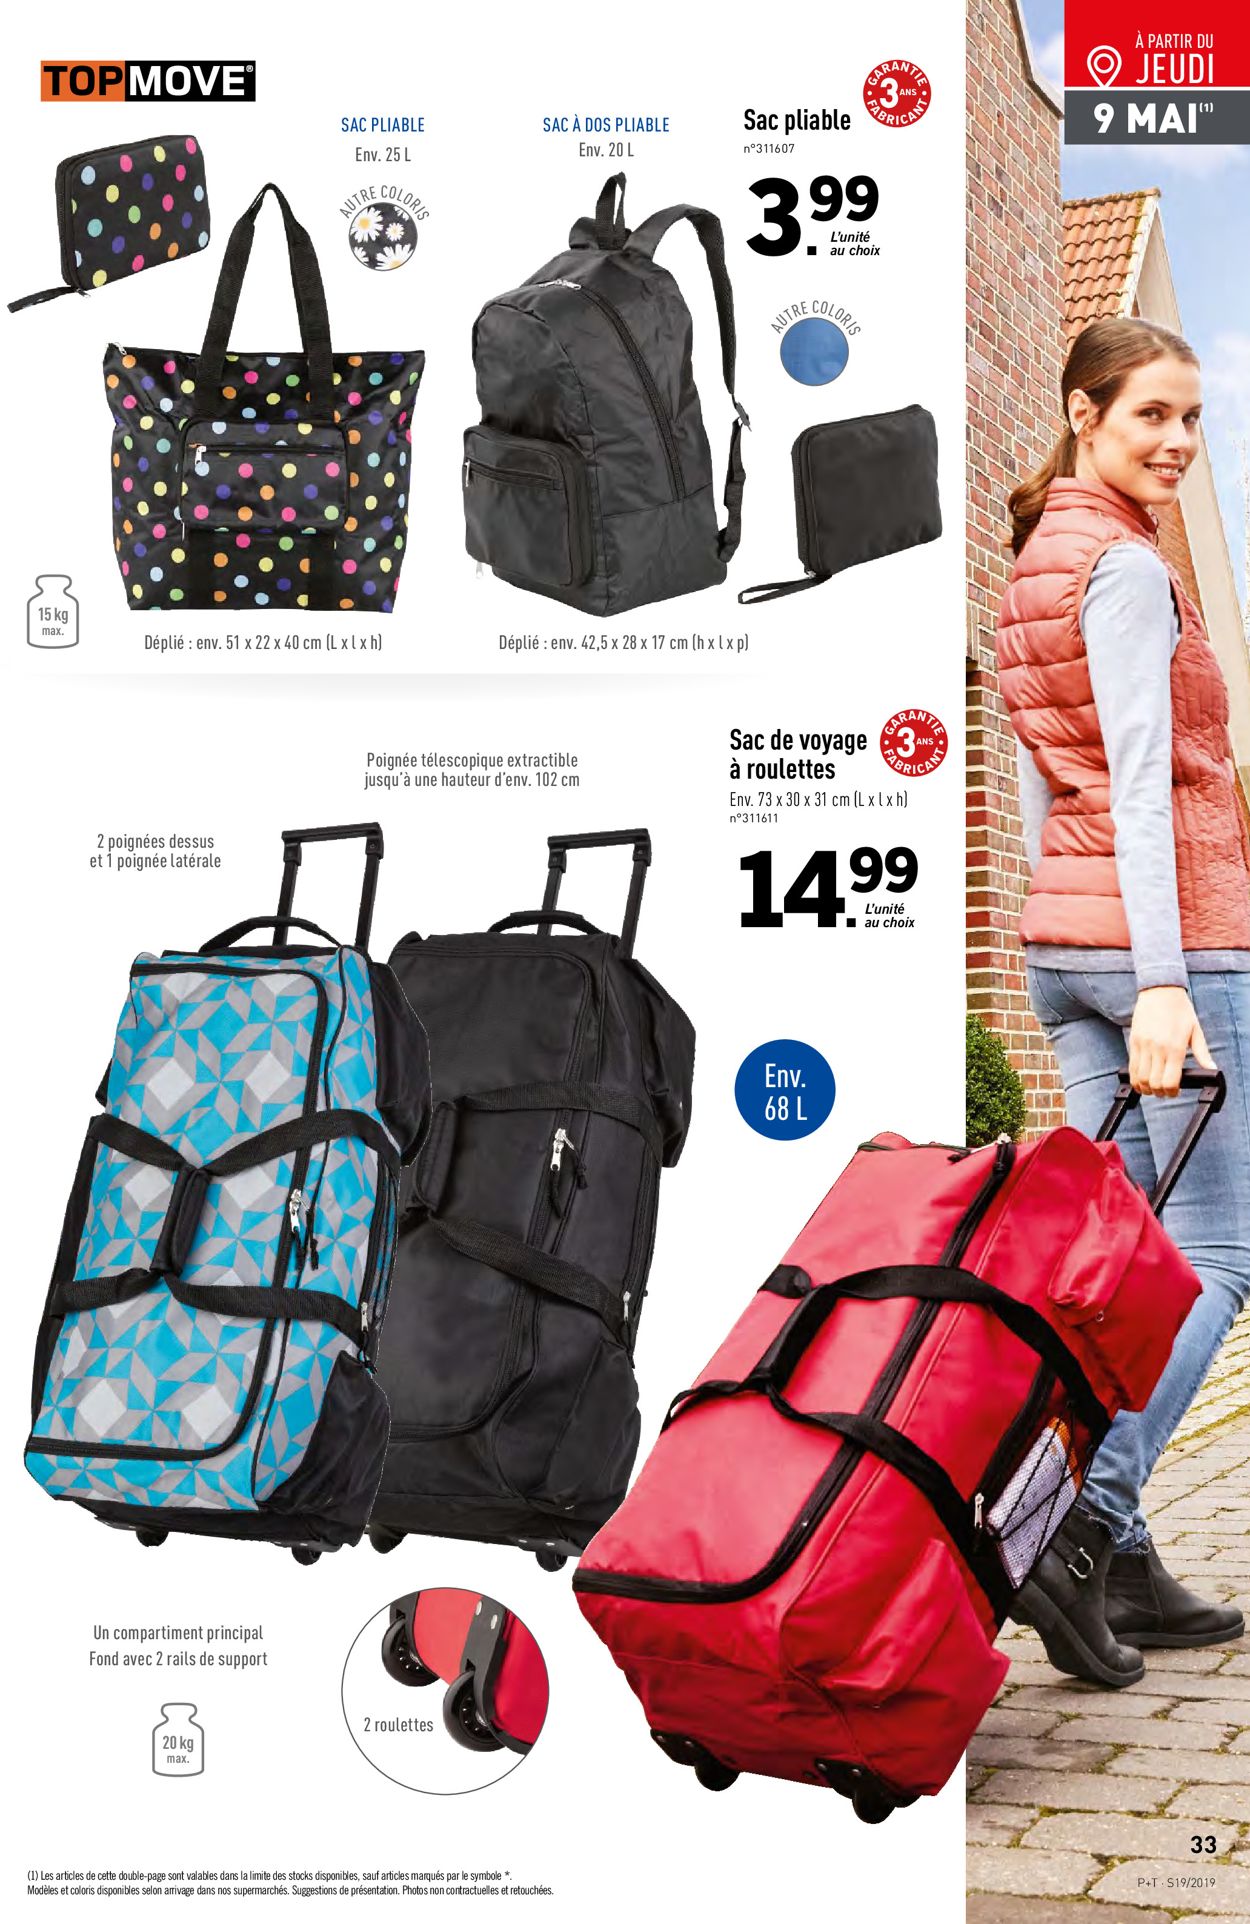 Lidl Catalogue - 08.05-14.05.2019 (Page 33)